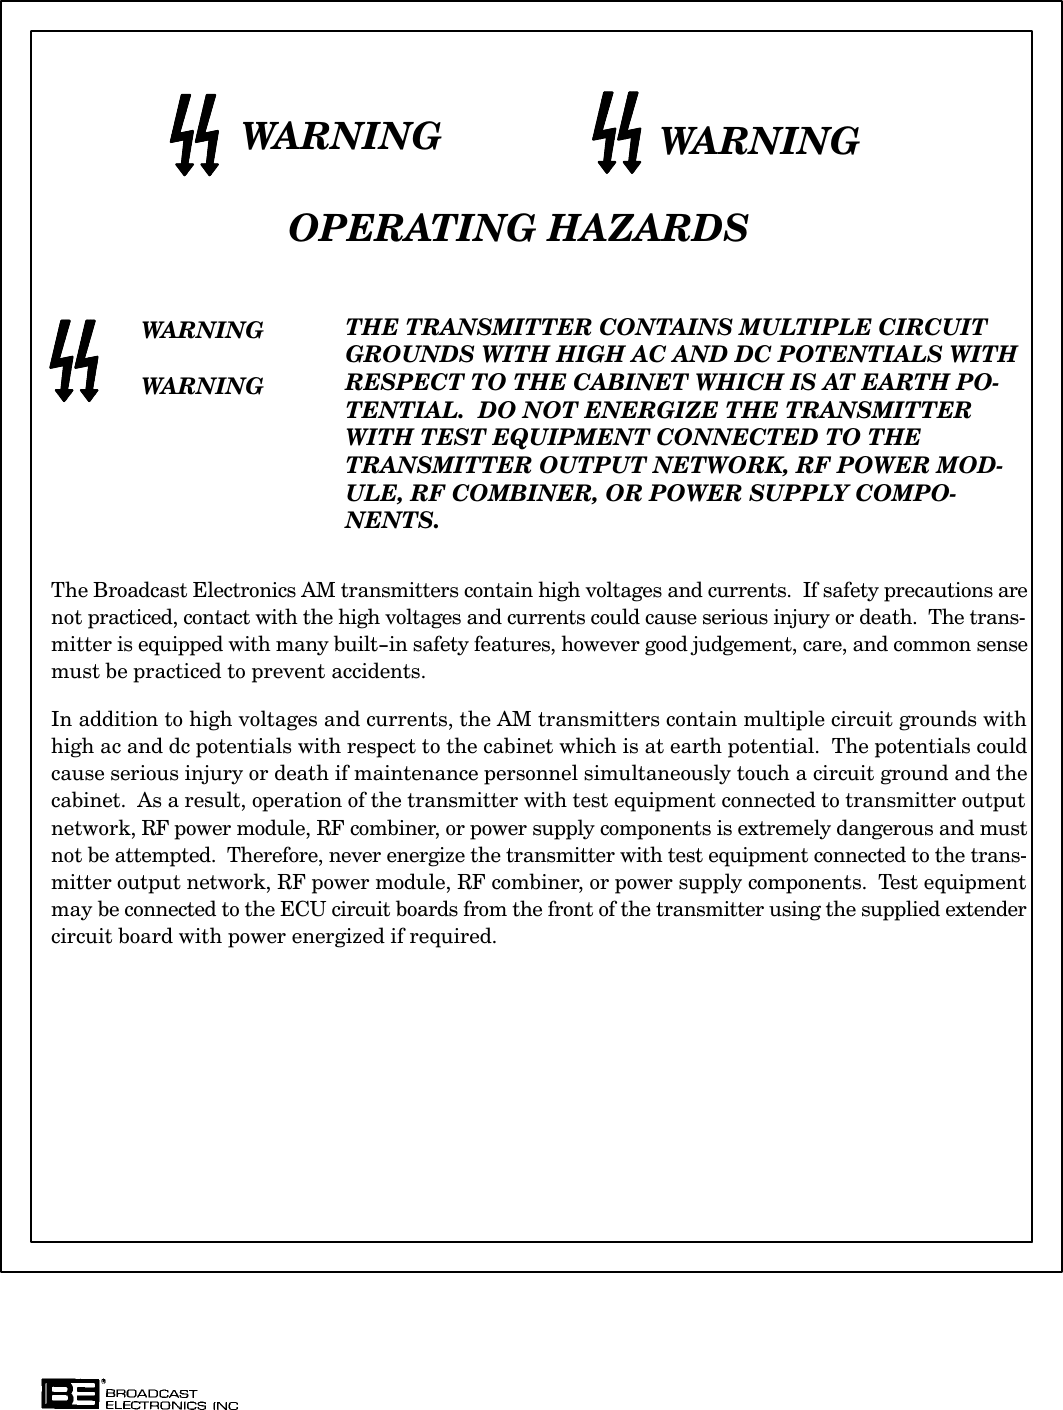 WARNING WARNINGOPERATING HAZARDSWARNINGWARNINGTHE TRANSMITTER CONTAINS MULTIPLE CIRCUITGROUNDS WITH HIGH AC AND DC POTENTIALS WITHRESPECT TO THE CABINET WHICH IS AT EARTH POĆTENTIAL.  DO NOT ENERGIZE THE TRANSMITTERWITH TEST EQUIPMENT CONNECTED TO THETRANSMITTER OUTPUT NETWORK, RF POWER MODĆULE, RF COMBINER, OR POWER SUPPLY COMPOĆNENTS.The Broadcast Electronics AM transmitters contain high voltages and currents.  If safety precautions arenot practiced, contact with the high voltages and currents could cause serious injury or death.  The transĆmitter is equipped with many built-in safety features, however good judgement, care, and common sensemust be practiced to prevent accidents.  In addition to high voltages and currents, the AM transmitters contain multiple circuit grounds withhigh ac and dc potentials with respect to the cabinet which is at earth potential.  The potentials couldcause serious injury or death if maintenance personnel simultaneously touch a circuit ground and thecabinet.  As a result, operation of the transmitter with test equipment connected to transmitter outputnetwork, RF power module, RF combiner, or power supply components is extremely dangerous and mustnot be attempted.  Therefore, never energize the transmitter with test equipment connected to the transĆmitter output network, RF power module, RF combiner, or power supply components.  Test equipmentmay be connected to the ECU circuit boards from the front of the transmitter using the supplied extendercircuit board with power energized if required.